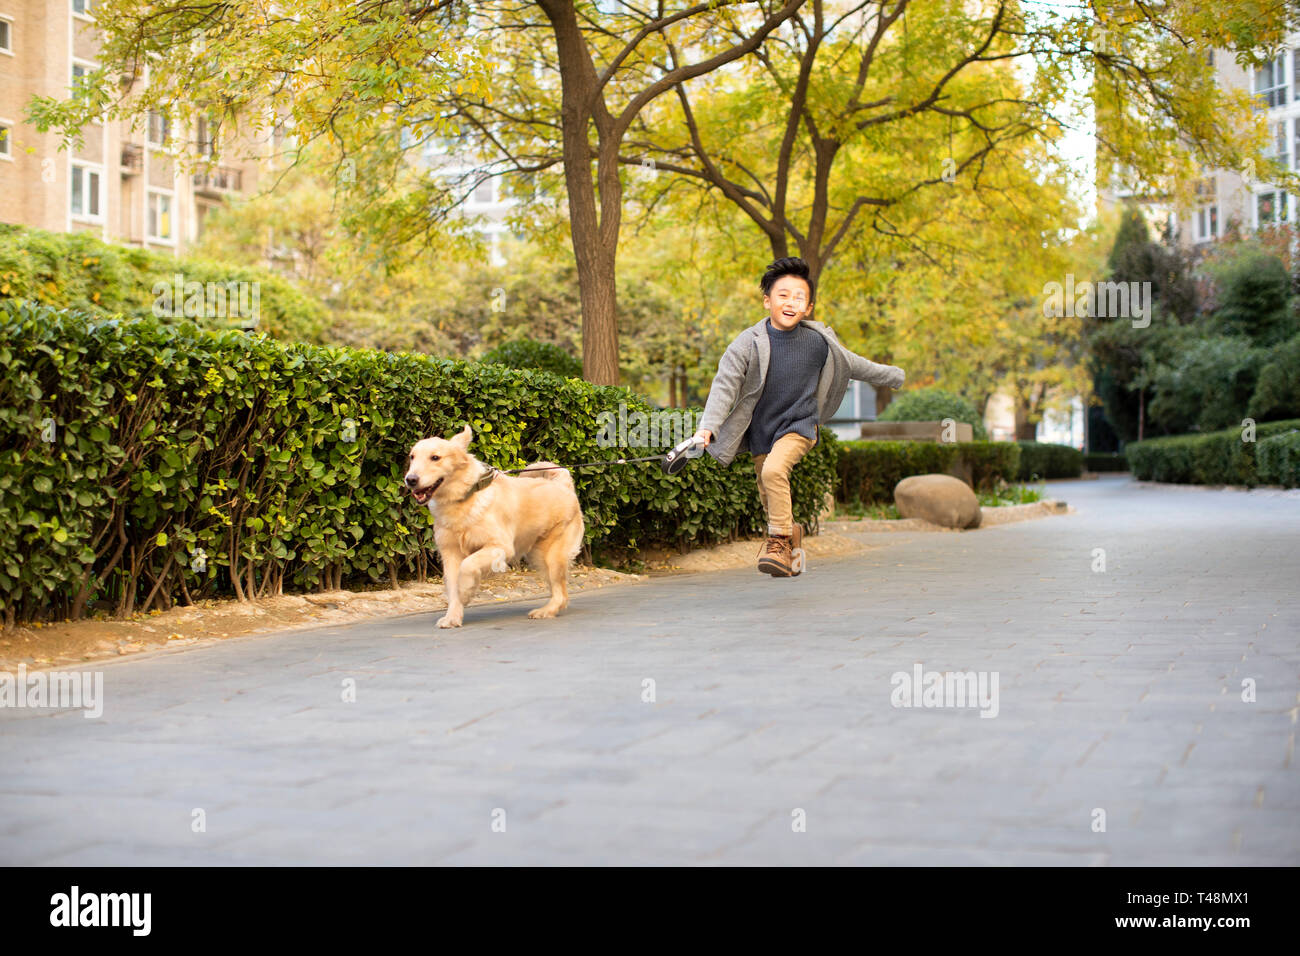 Little boy running with dog Stock Photo